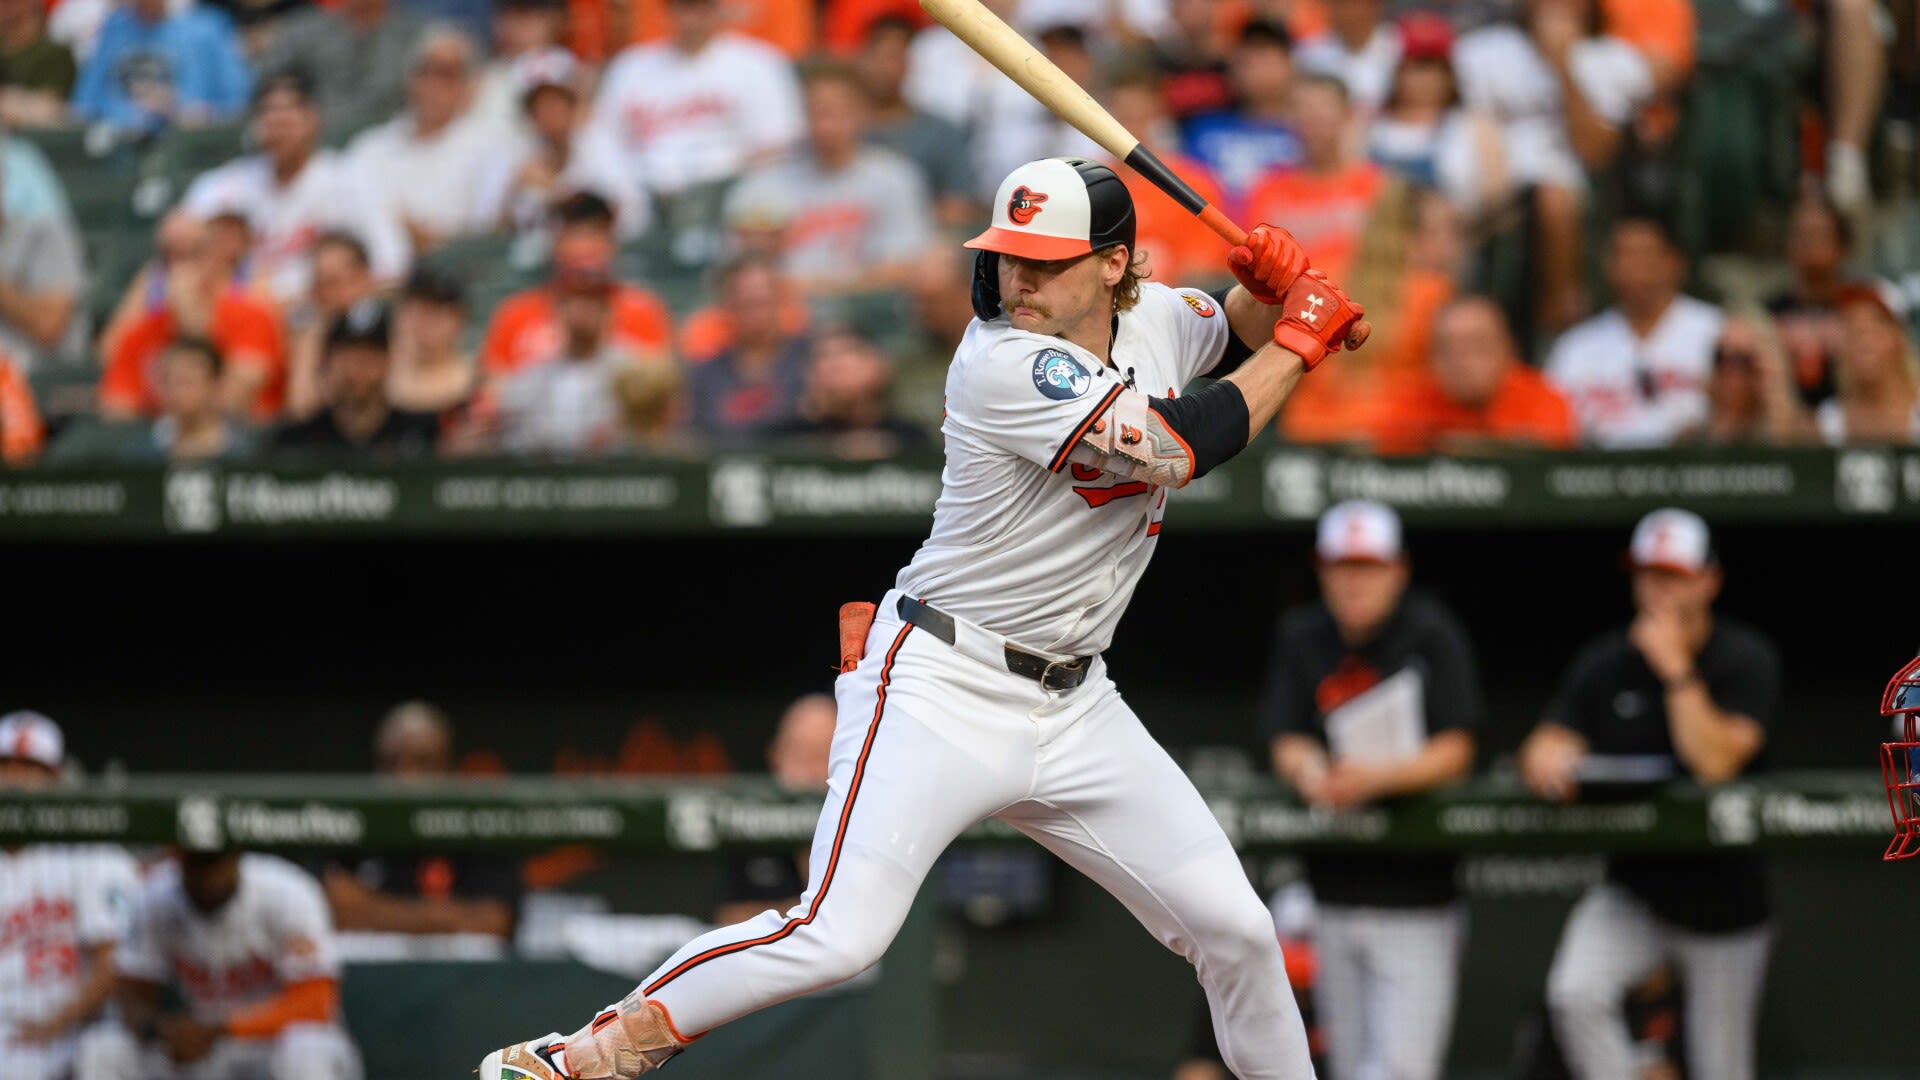 Orioles SS Gunnar Henderson is the 1st participant in this year’s Home Run Derby